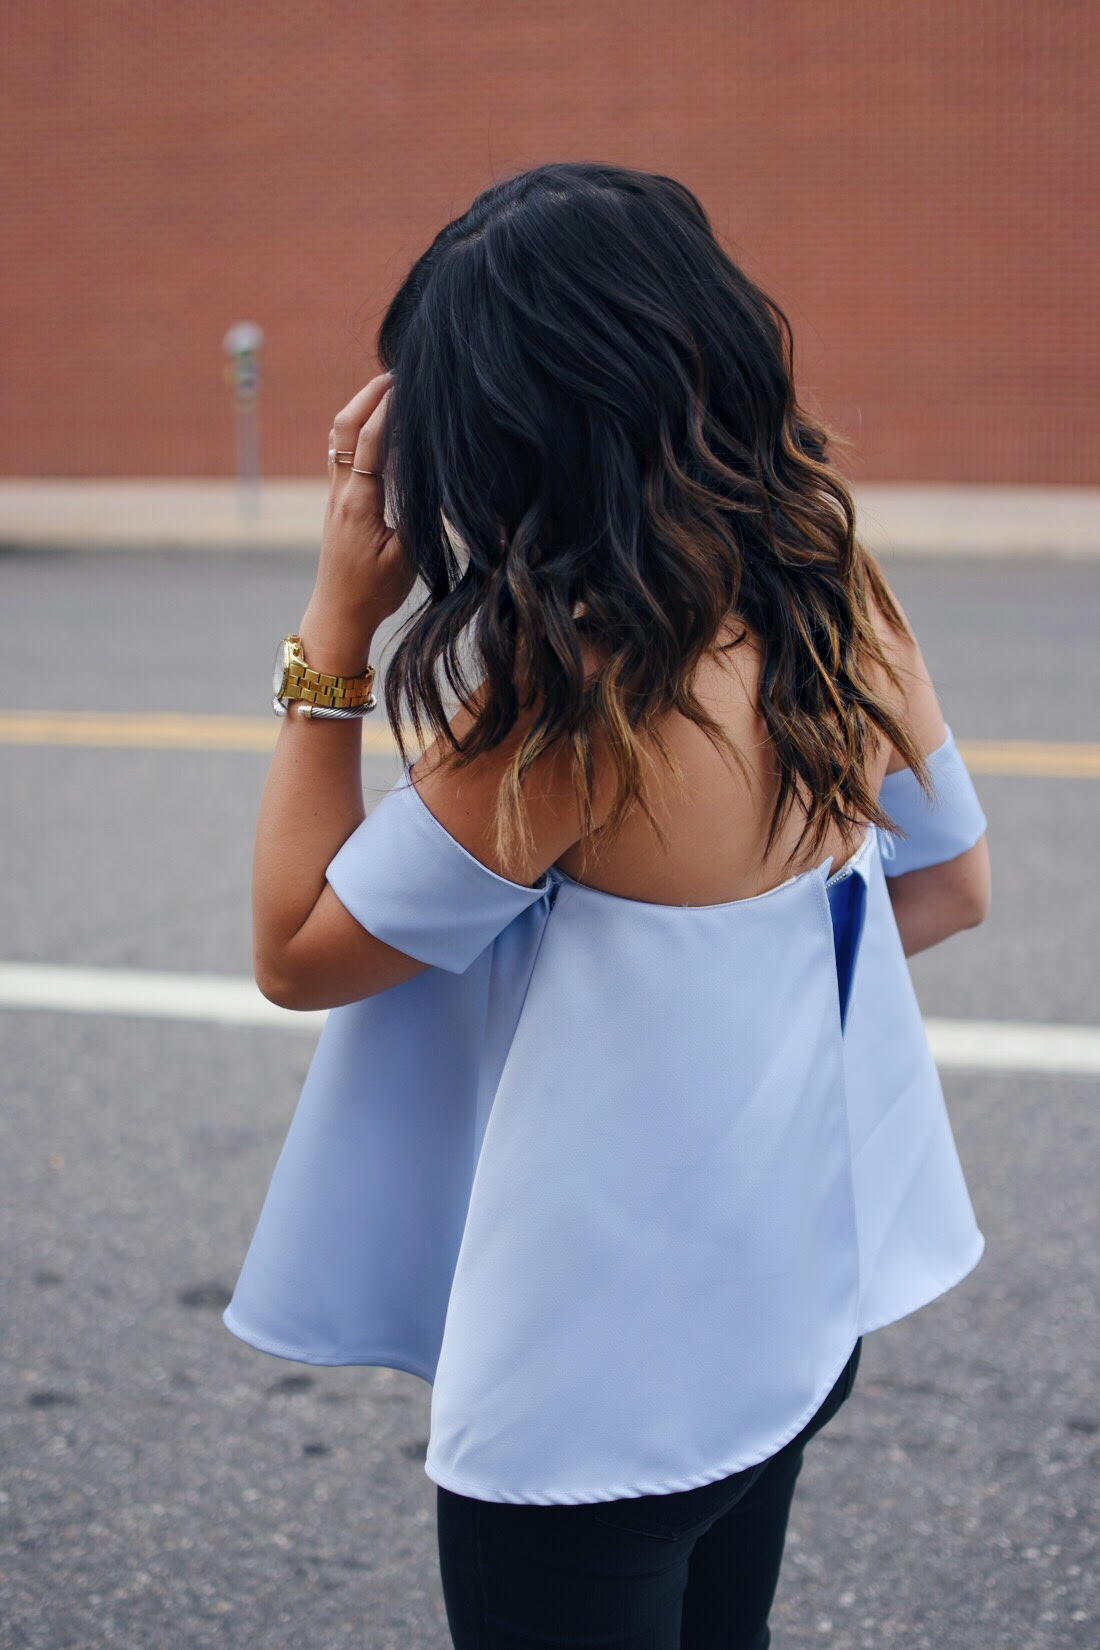 Carolina Hellal of Chic Talk wearing a Chicwish a strapless top, Madewell jeans, and Gold timex watch